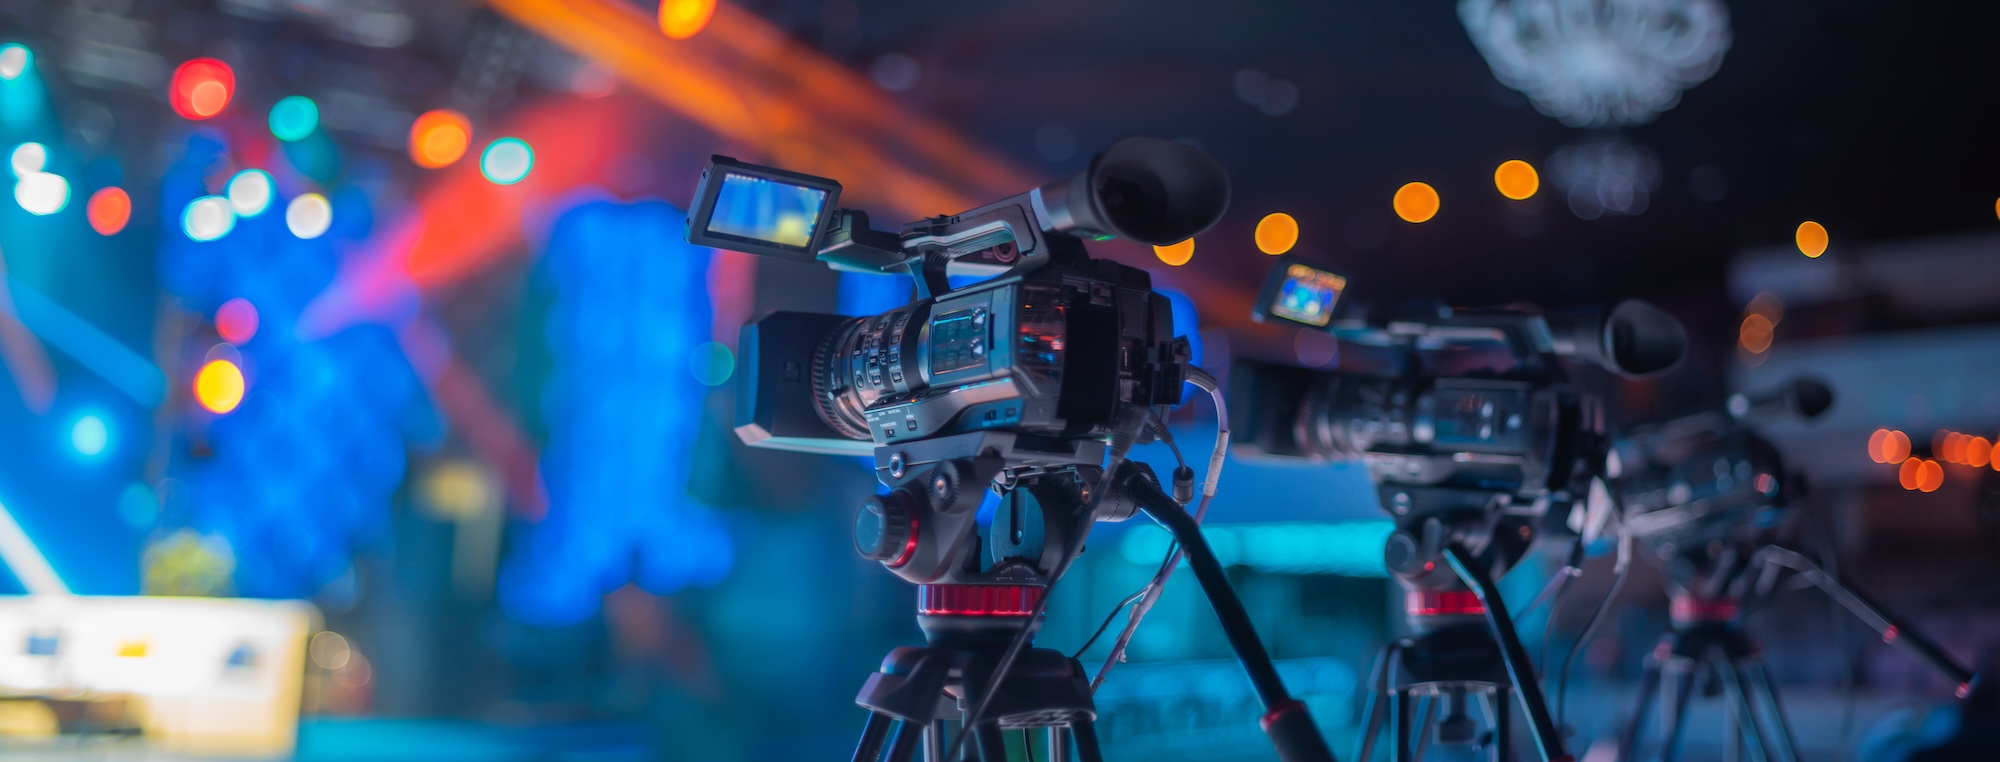 Professional video cameras on tripods streaming an event